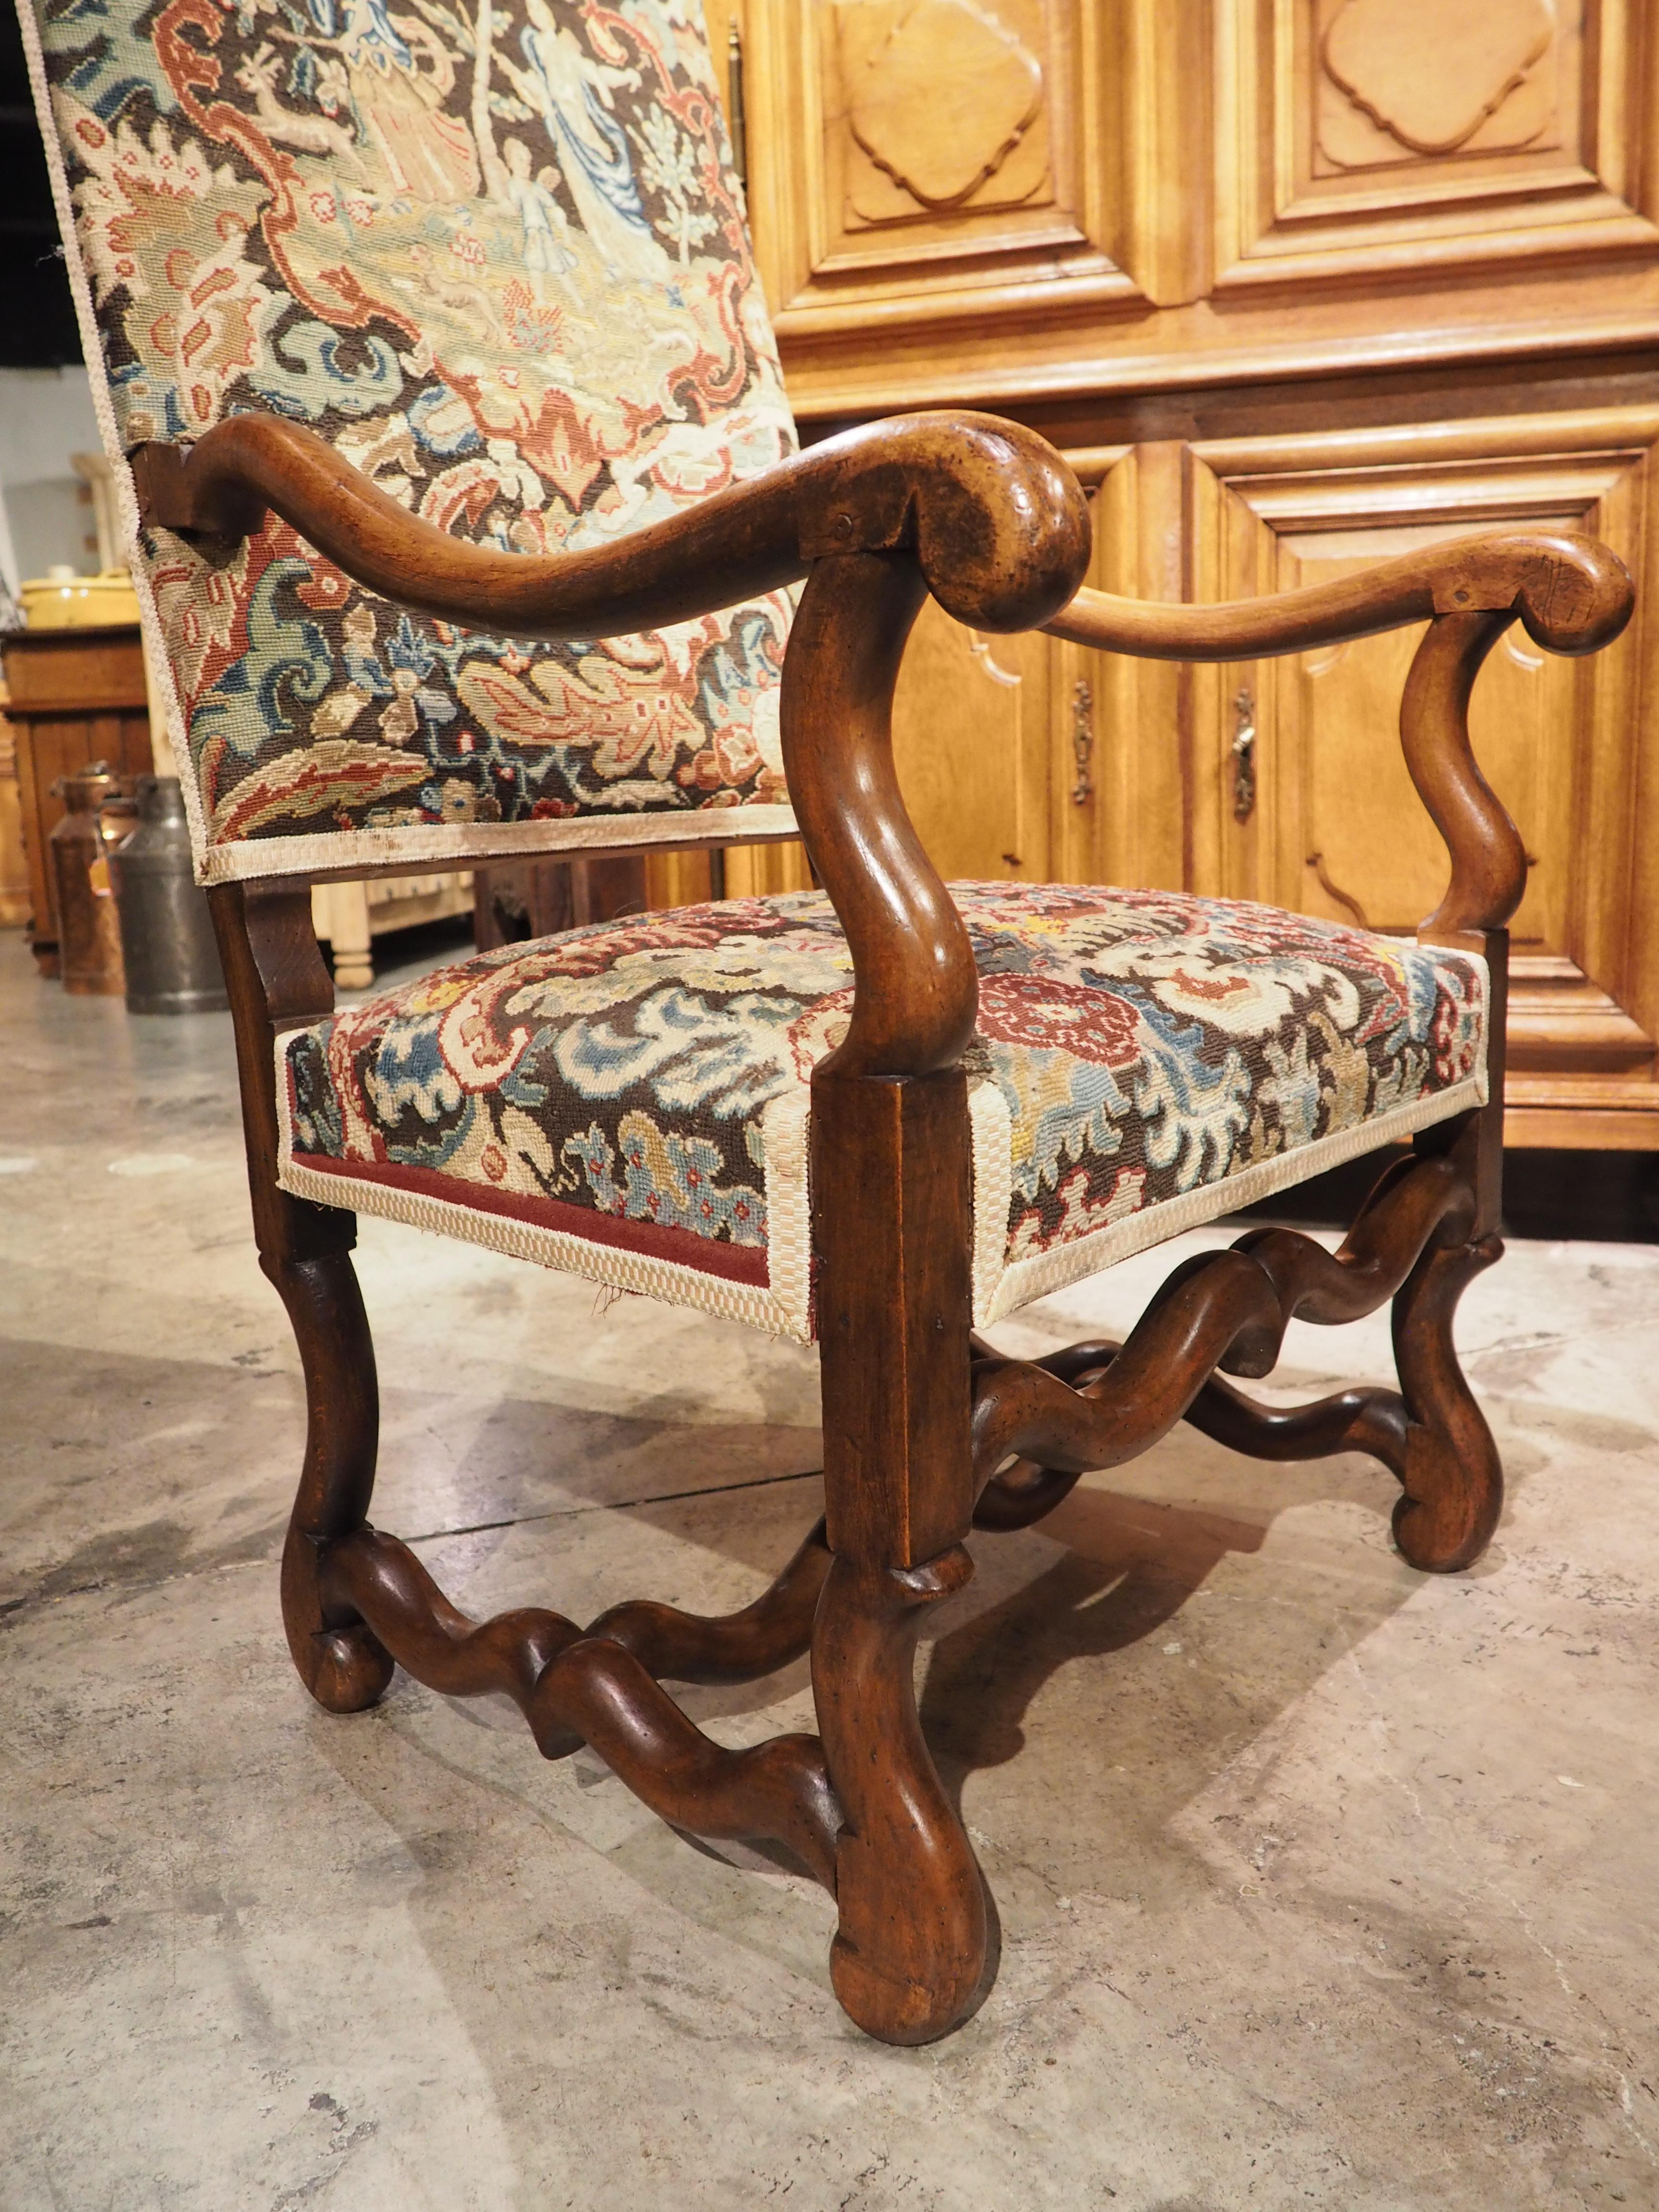 Textile Pair of Antique Walnut Wood Os De Mouton Armchairs from France, C. 1880